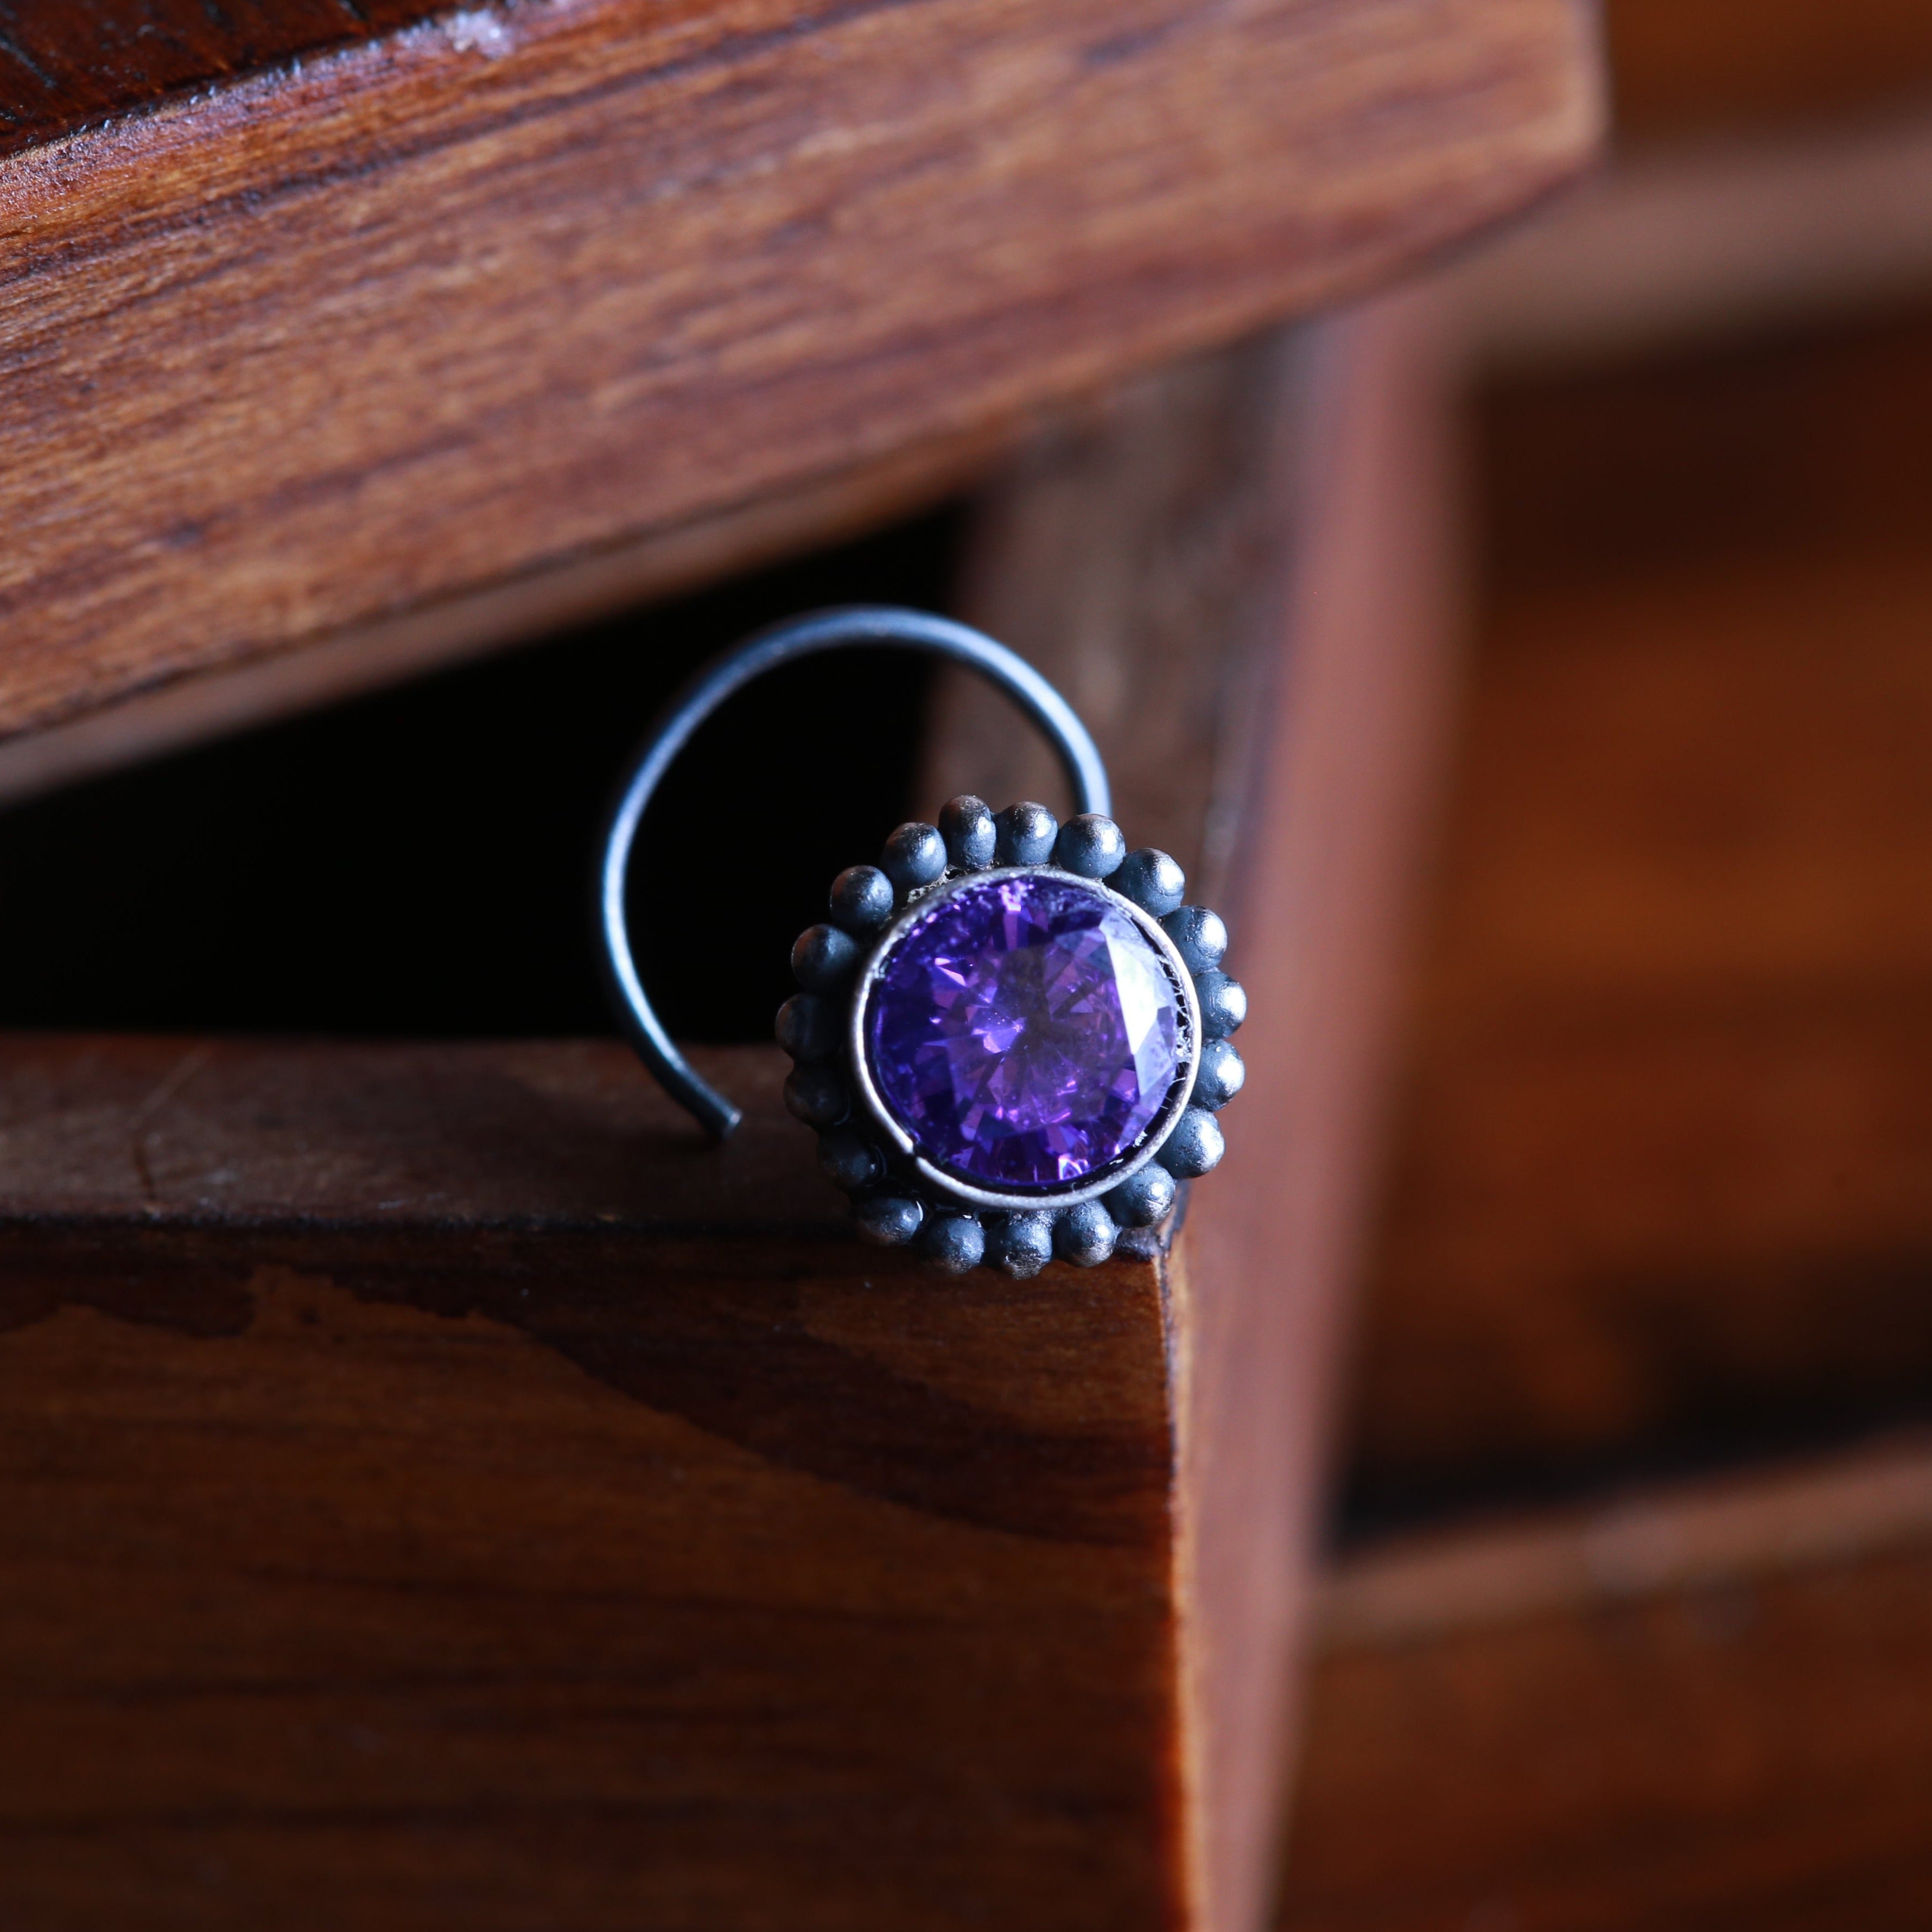 a close up of a ring with a purple stone